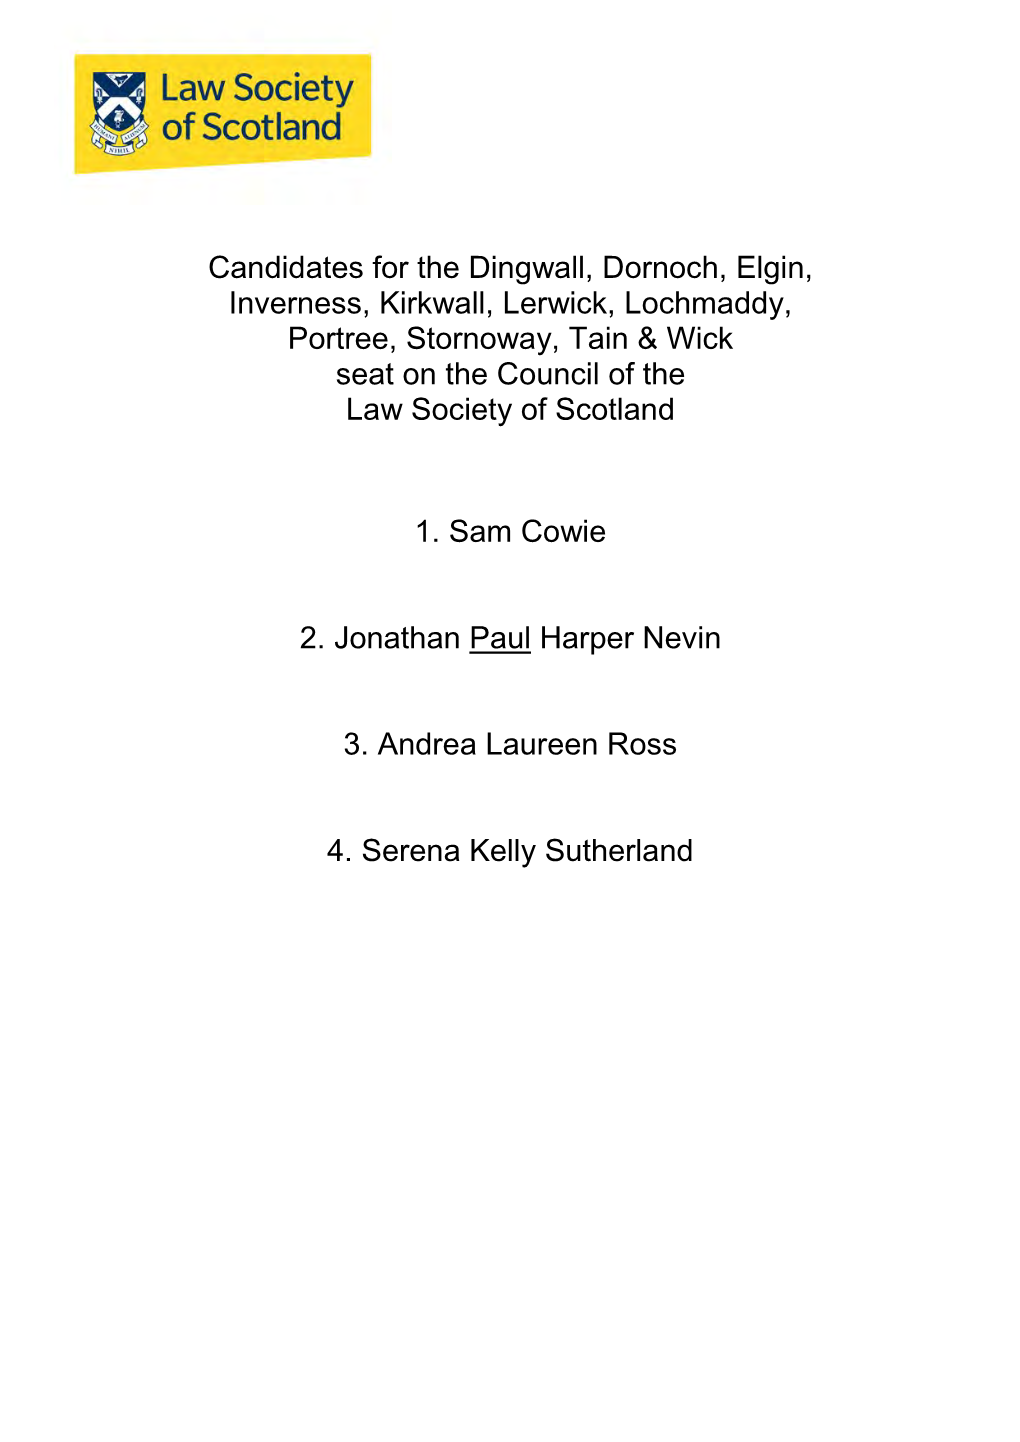 Candidates for the Dingwall, Dornoch, Elgin, Inverness, Kirkwall